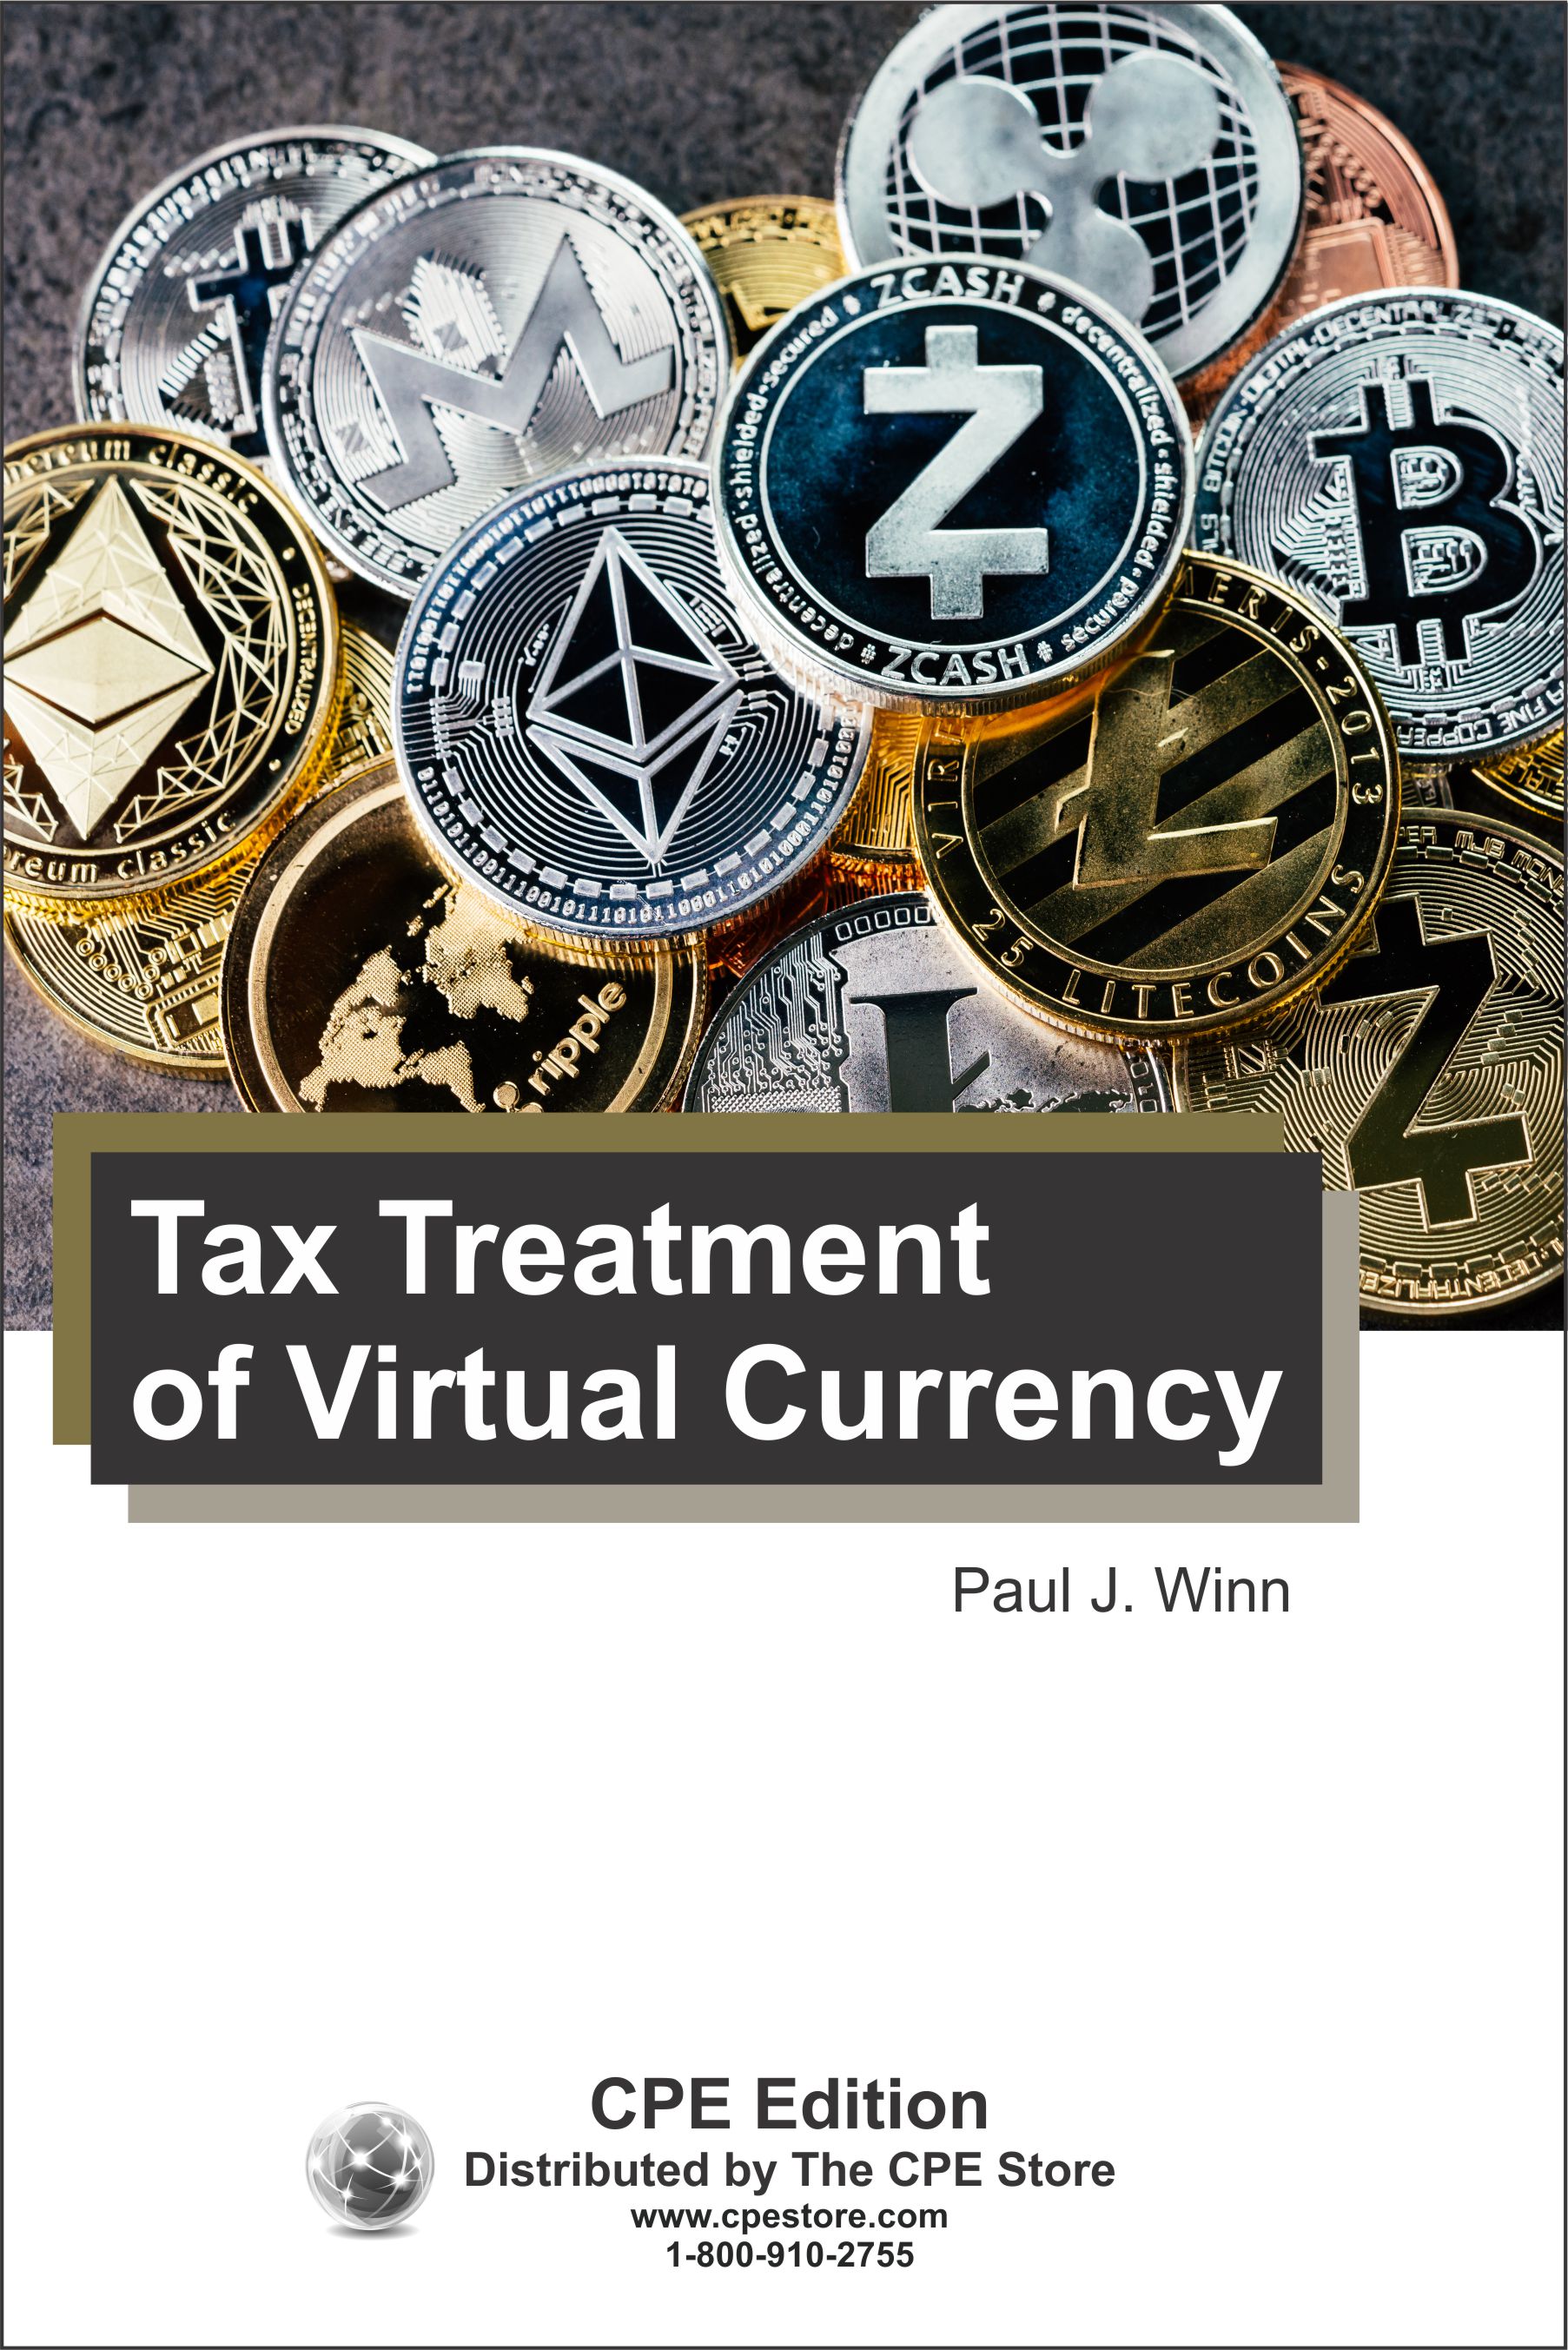 Tax Treatment of Virtual Currency